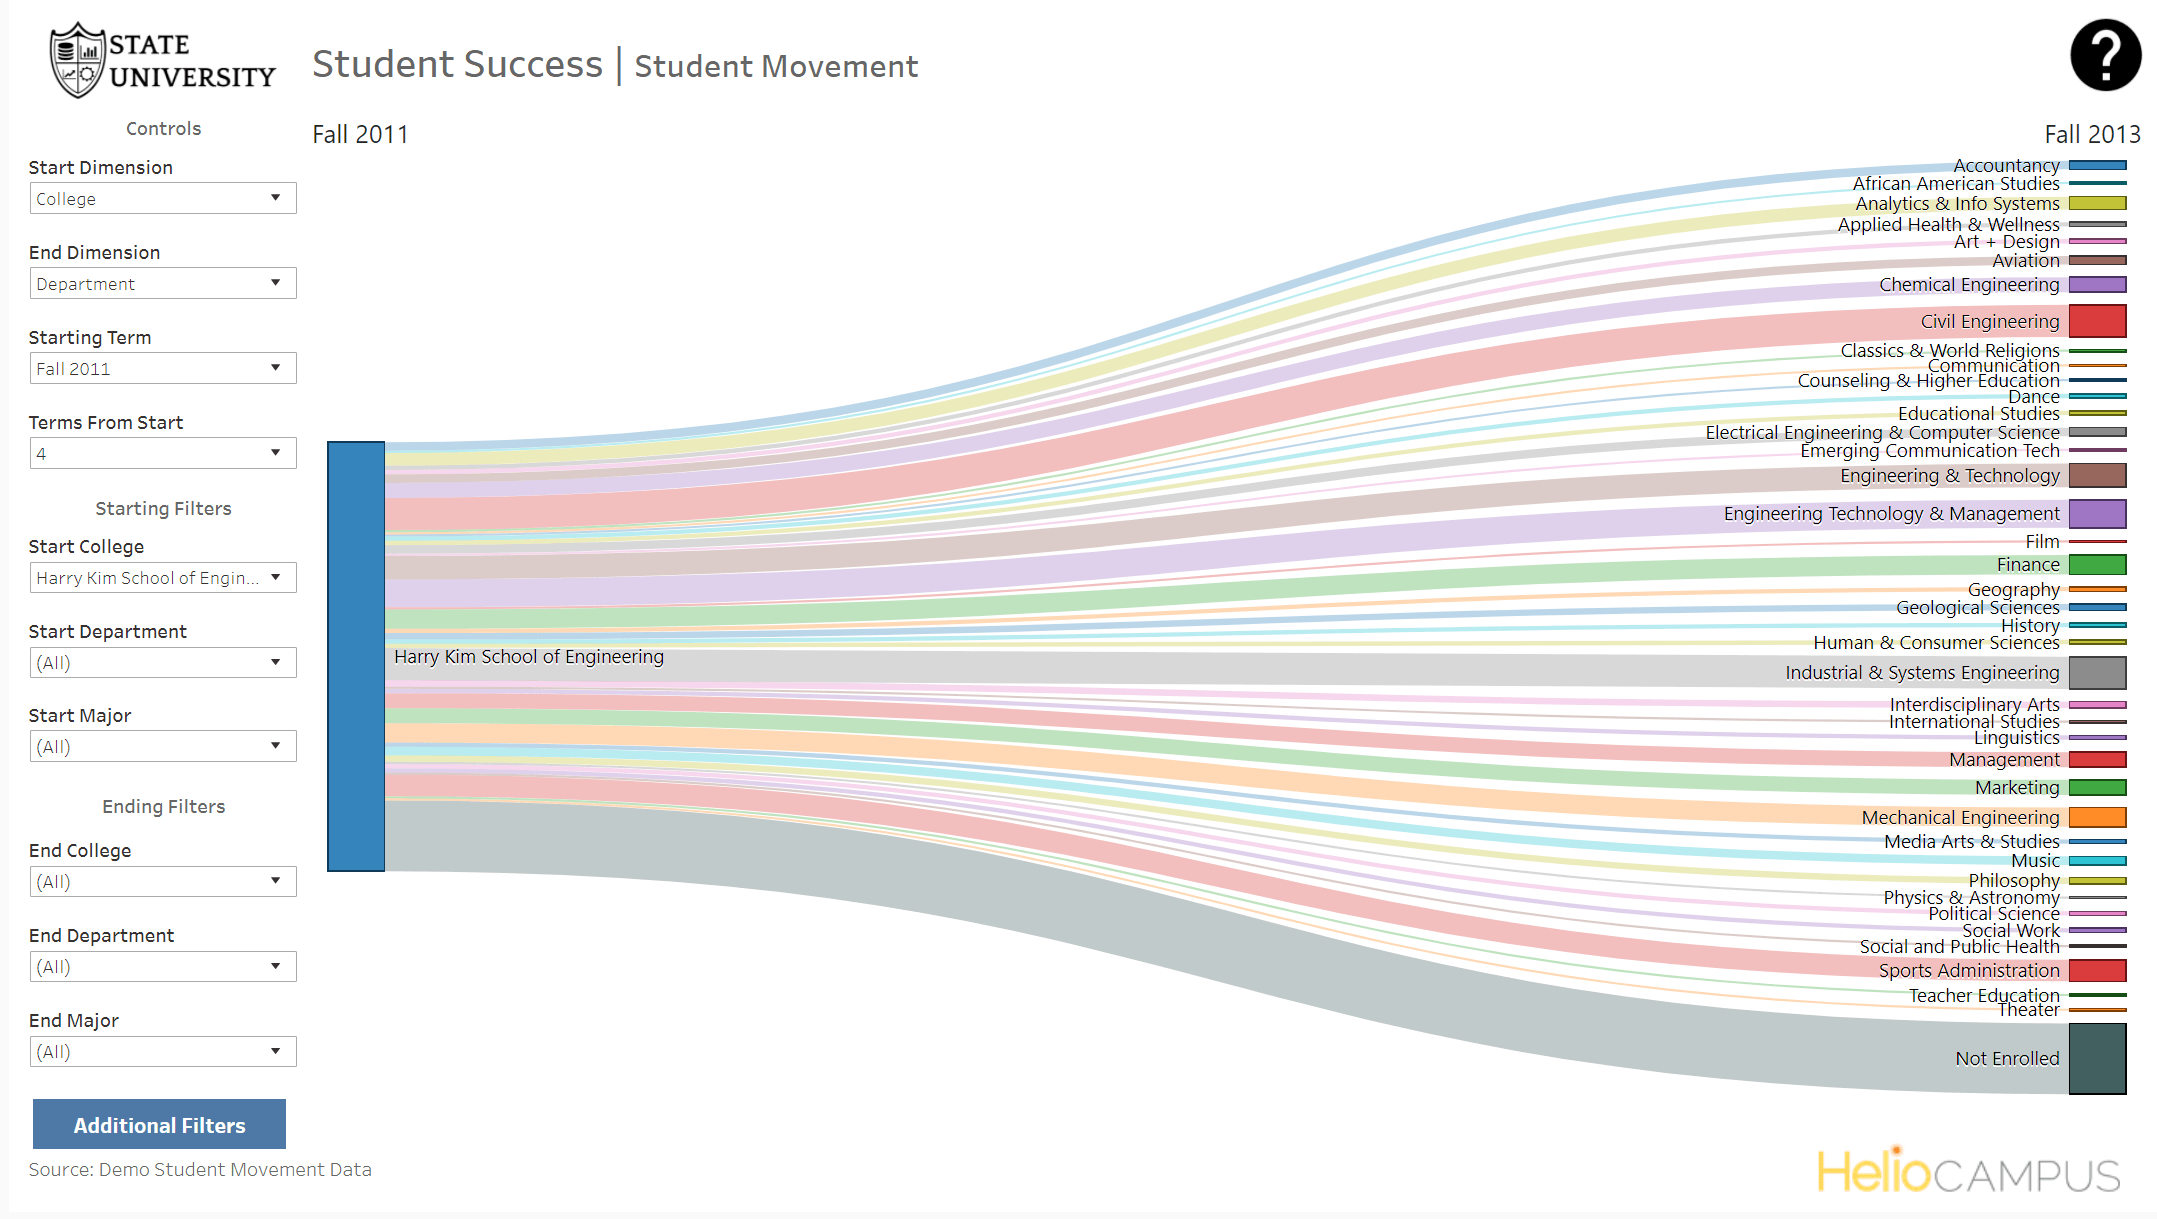 Product screenshot of a graph of student movement across academic majors